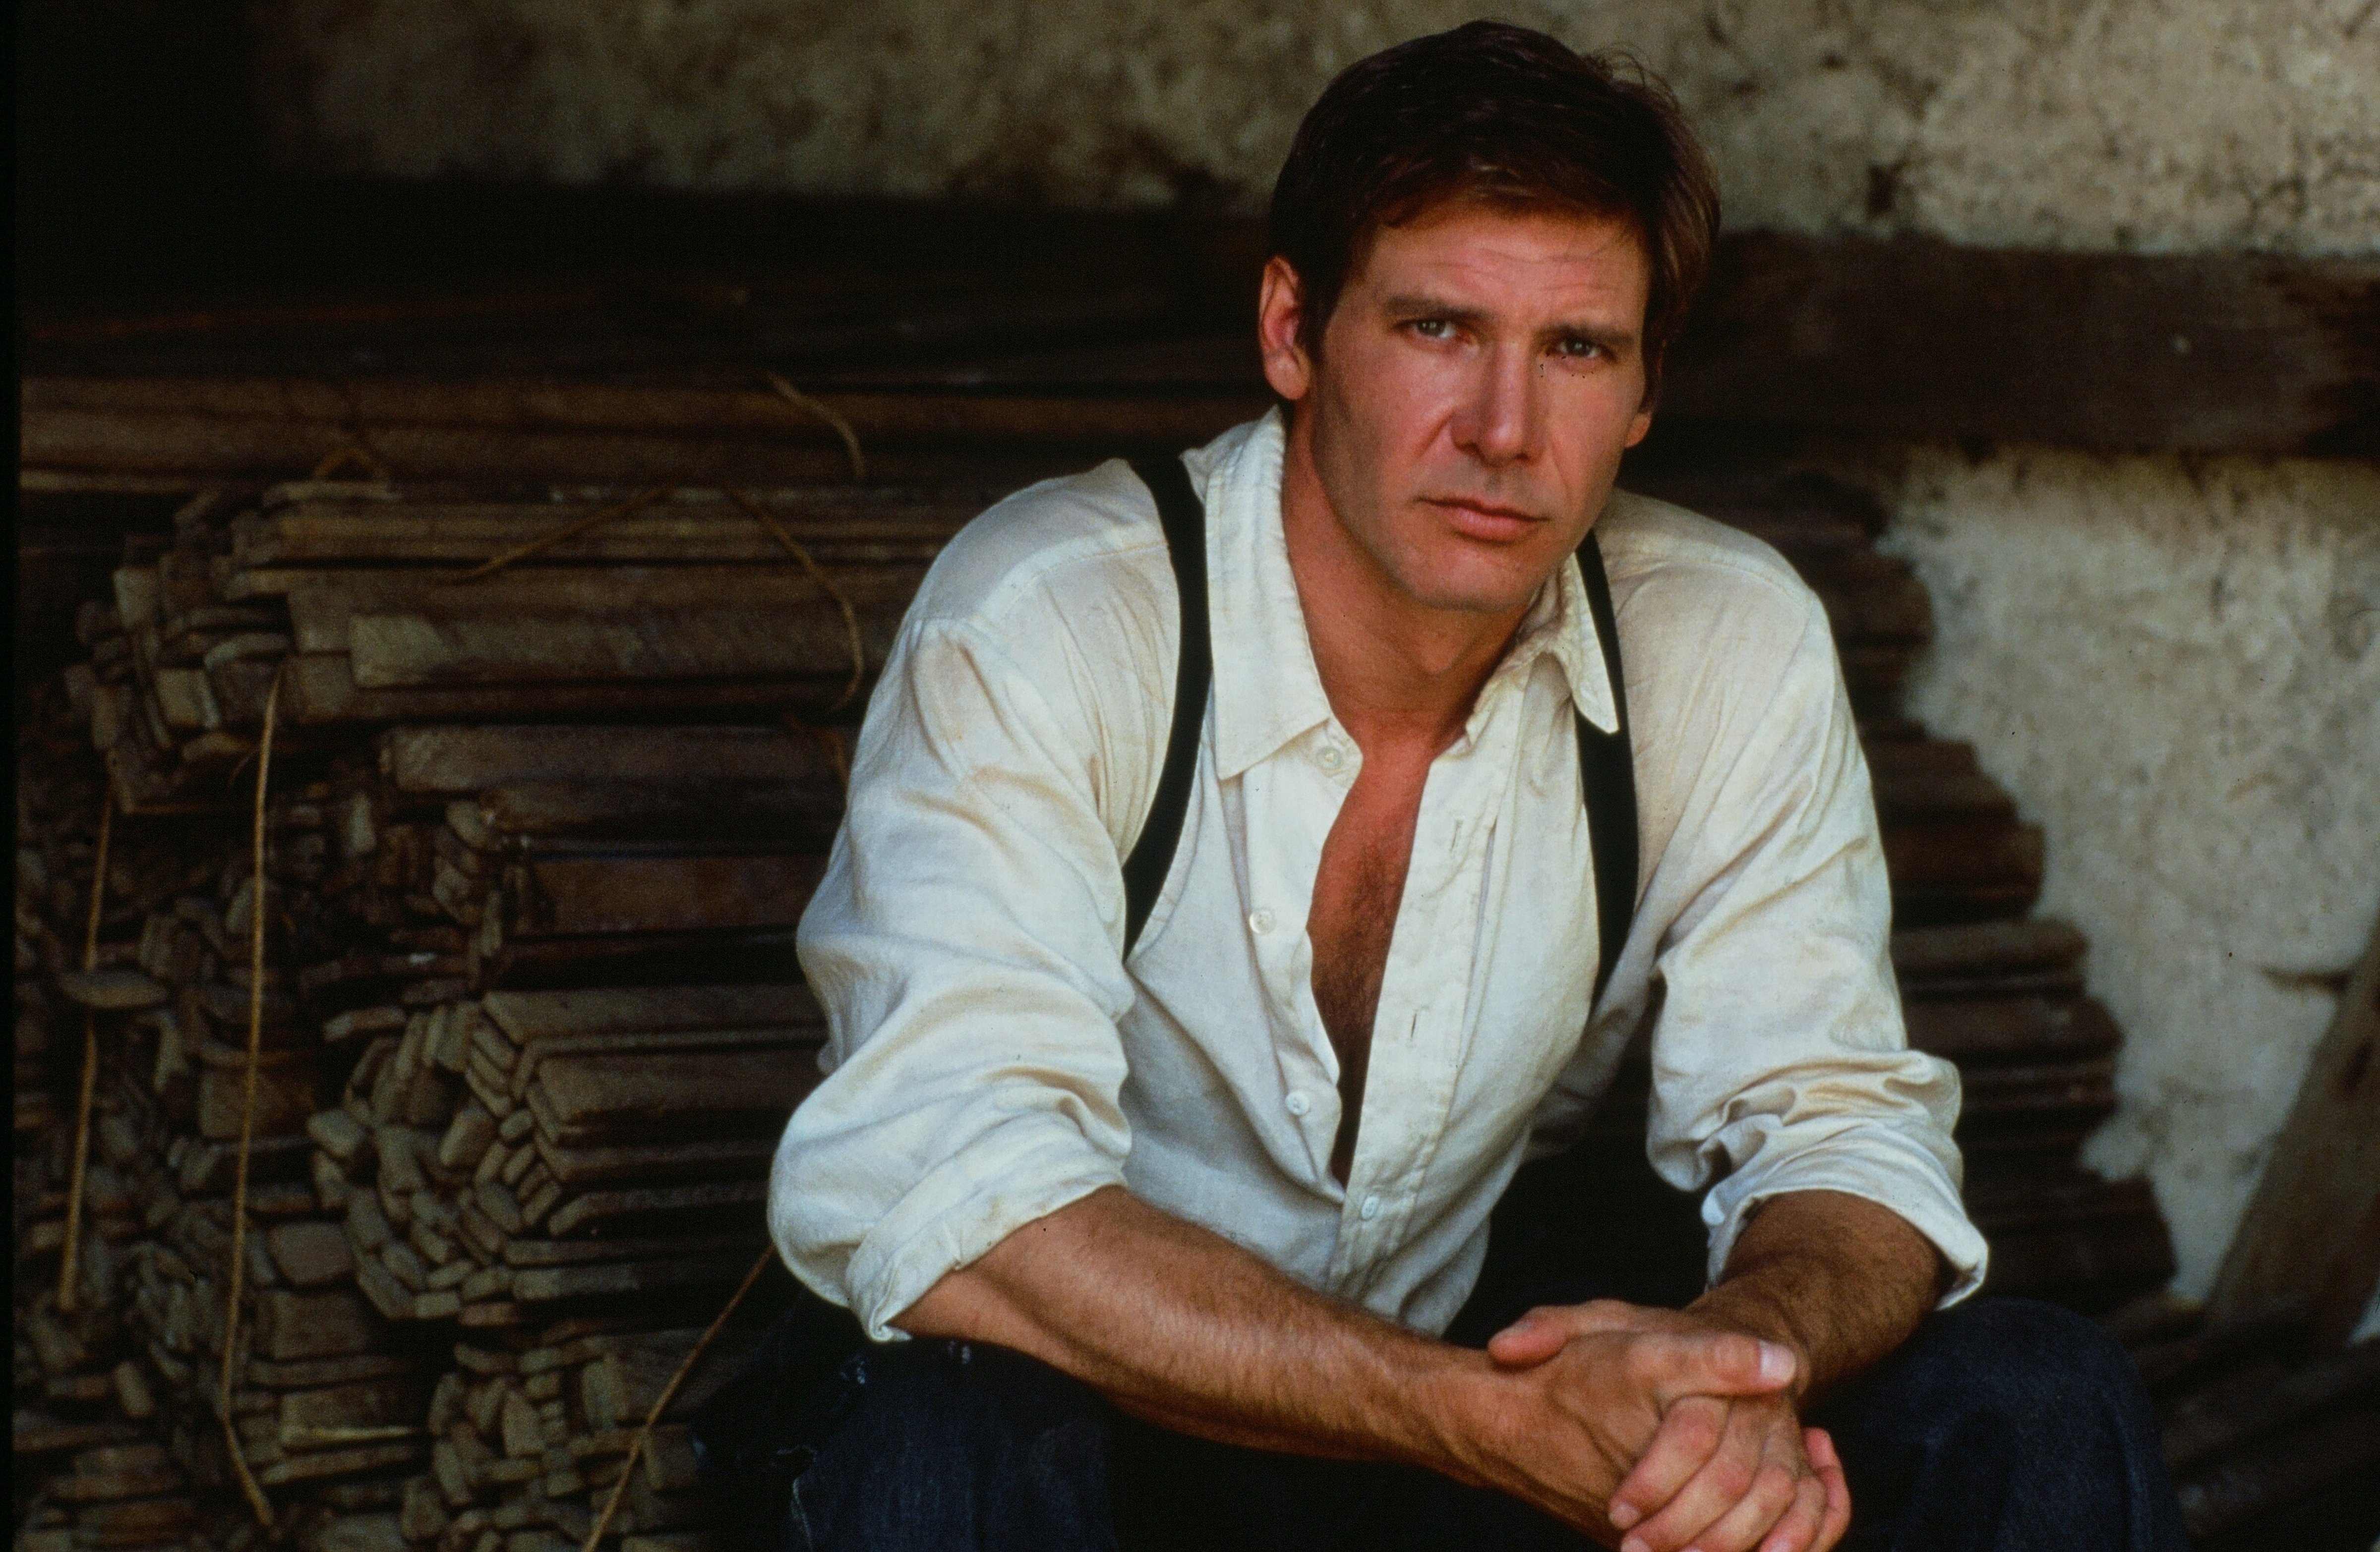 Harrison Ford poses for the Paramount Pictures movie "Witness" circa 1985. (Hulton Archive/Getty Images)